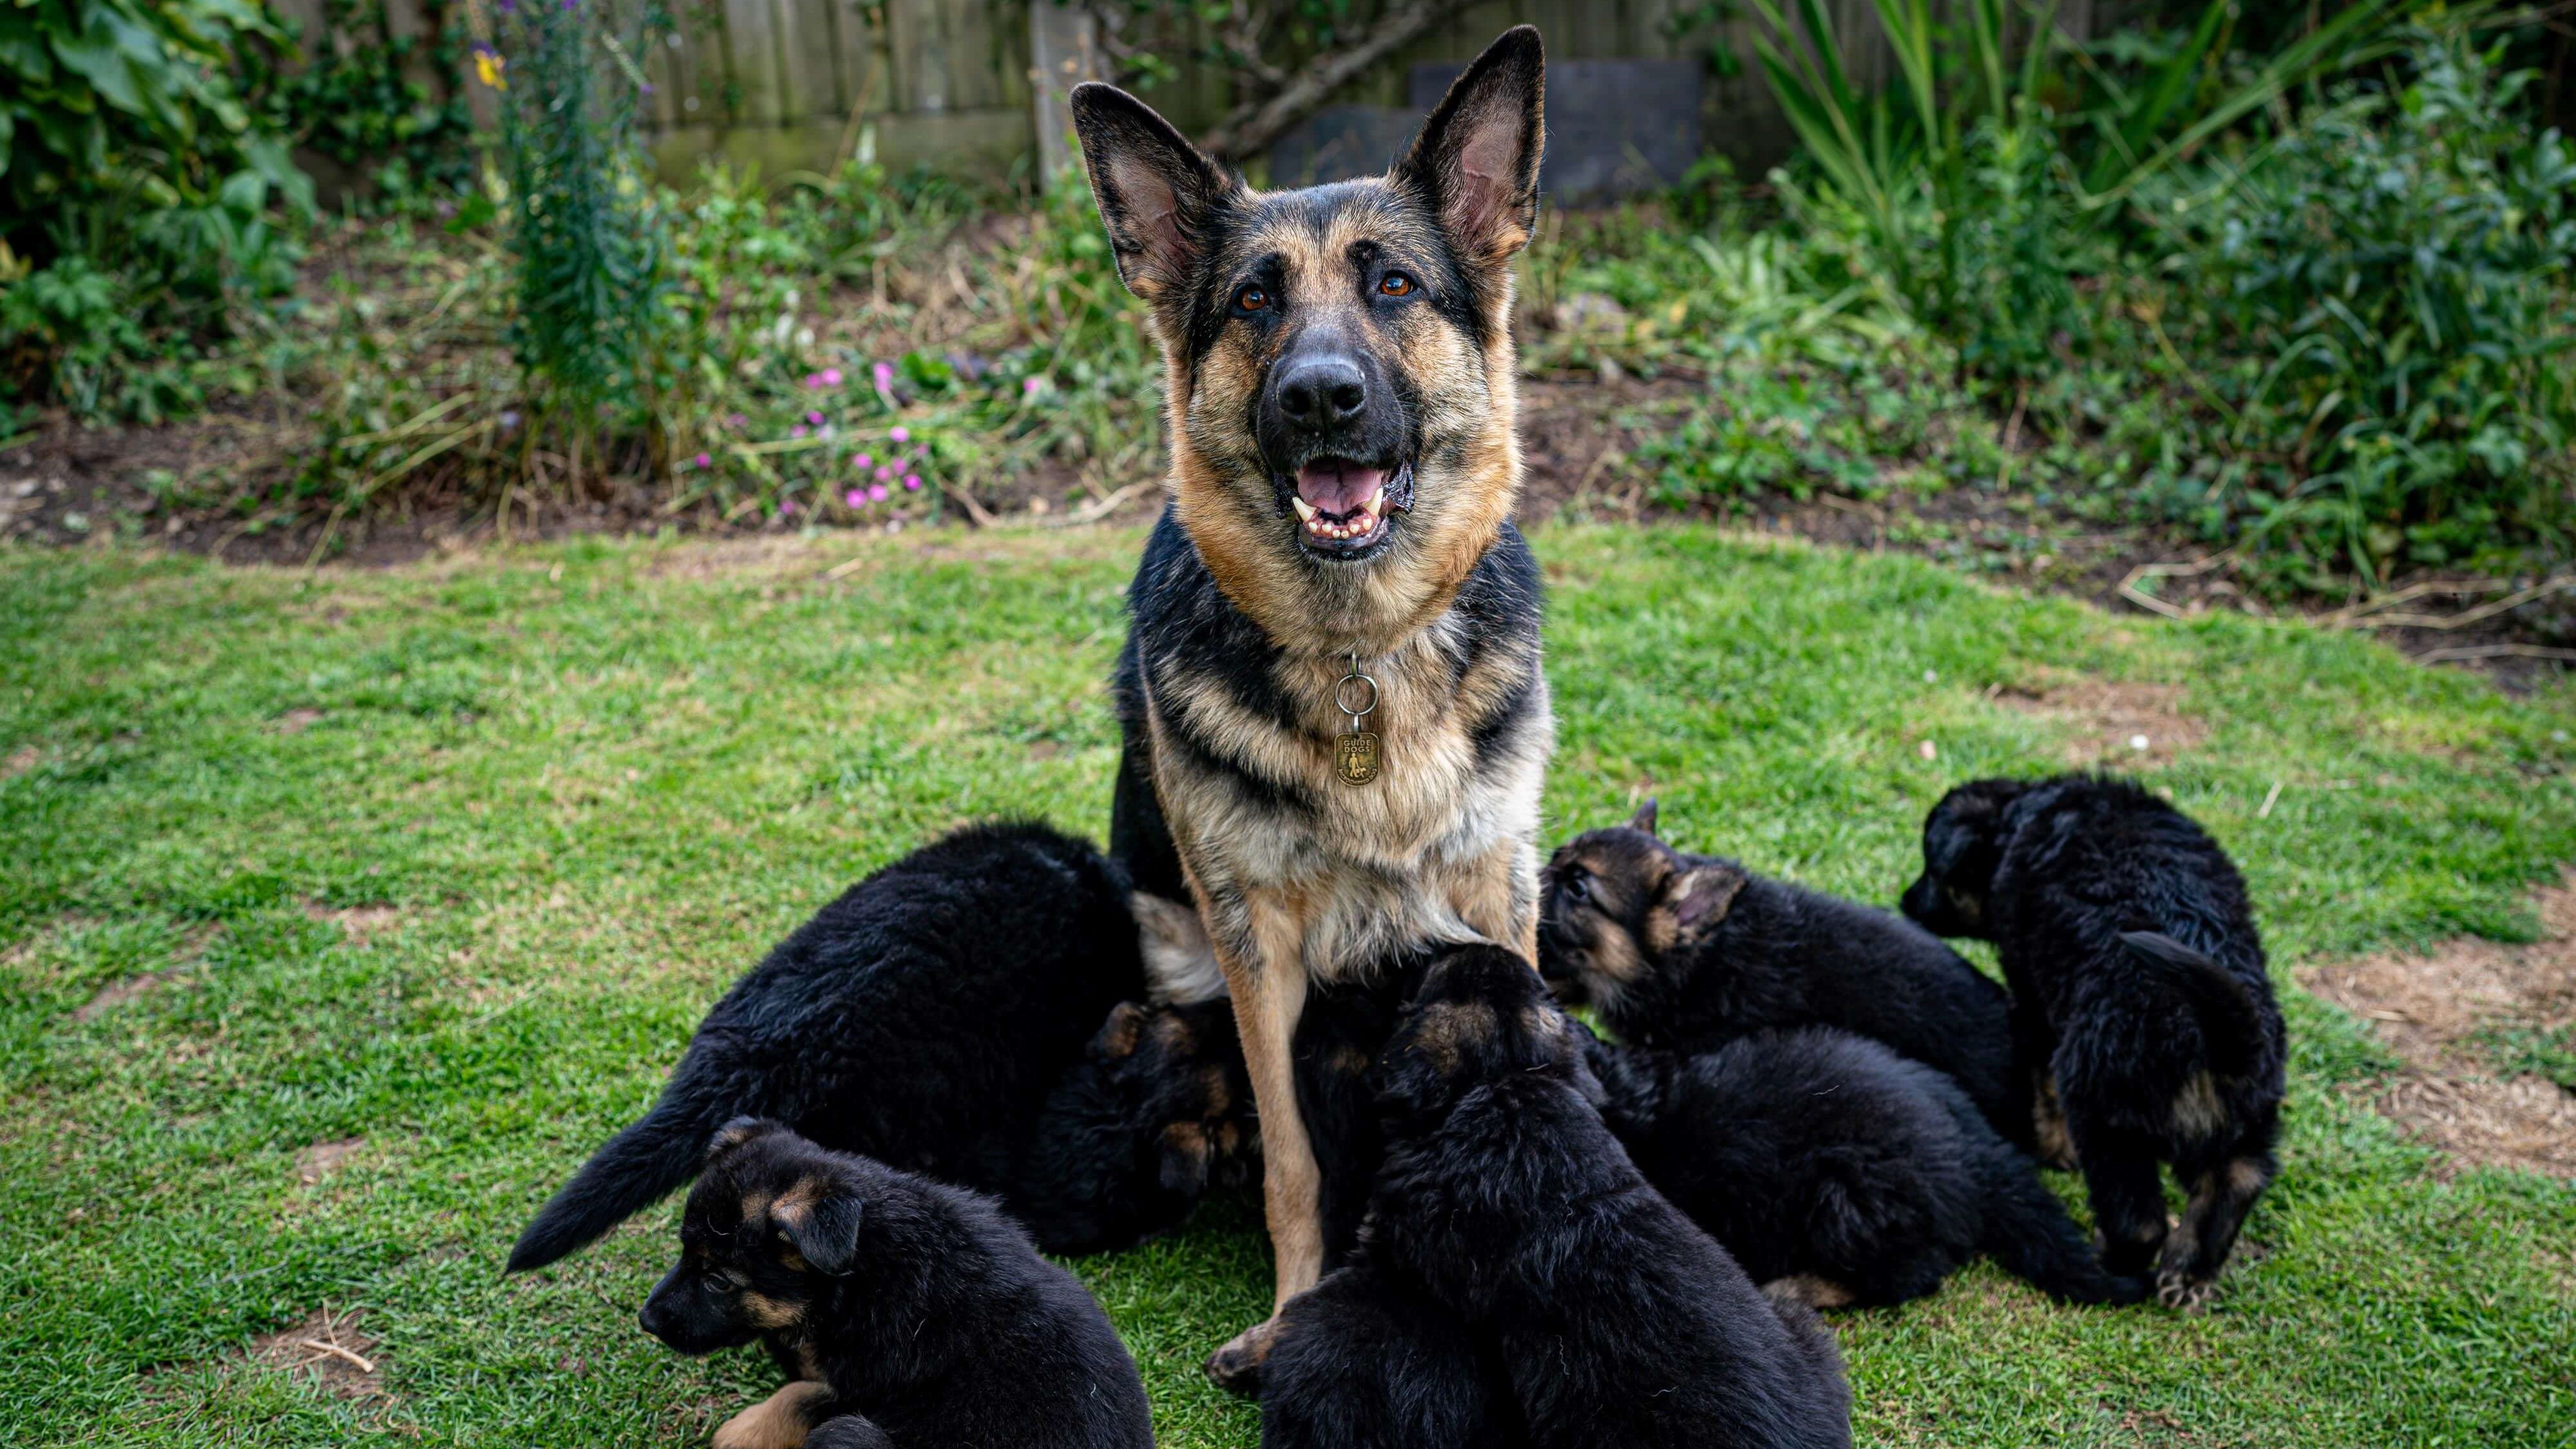 German shepherd guide dog mum Unity with her six-week-old litter huddled around her in the garden.